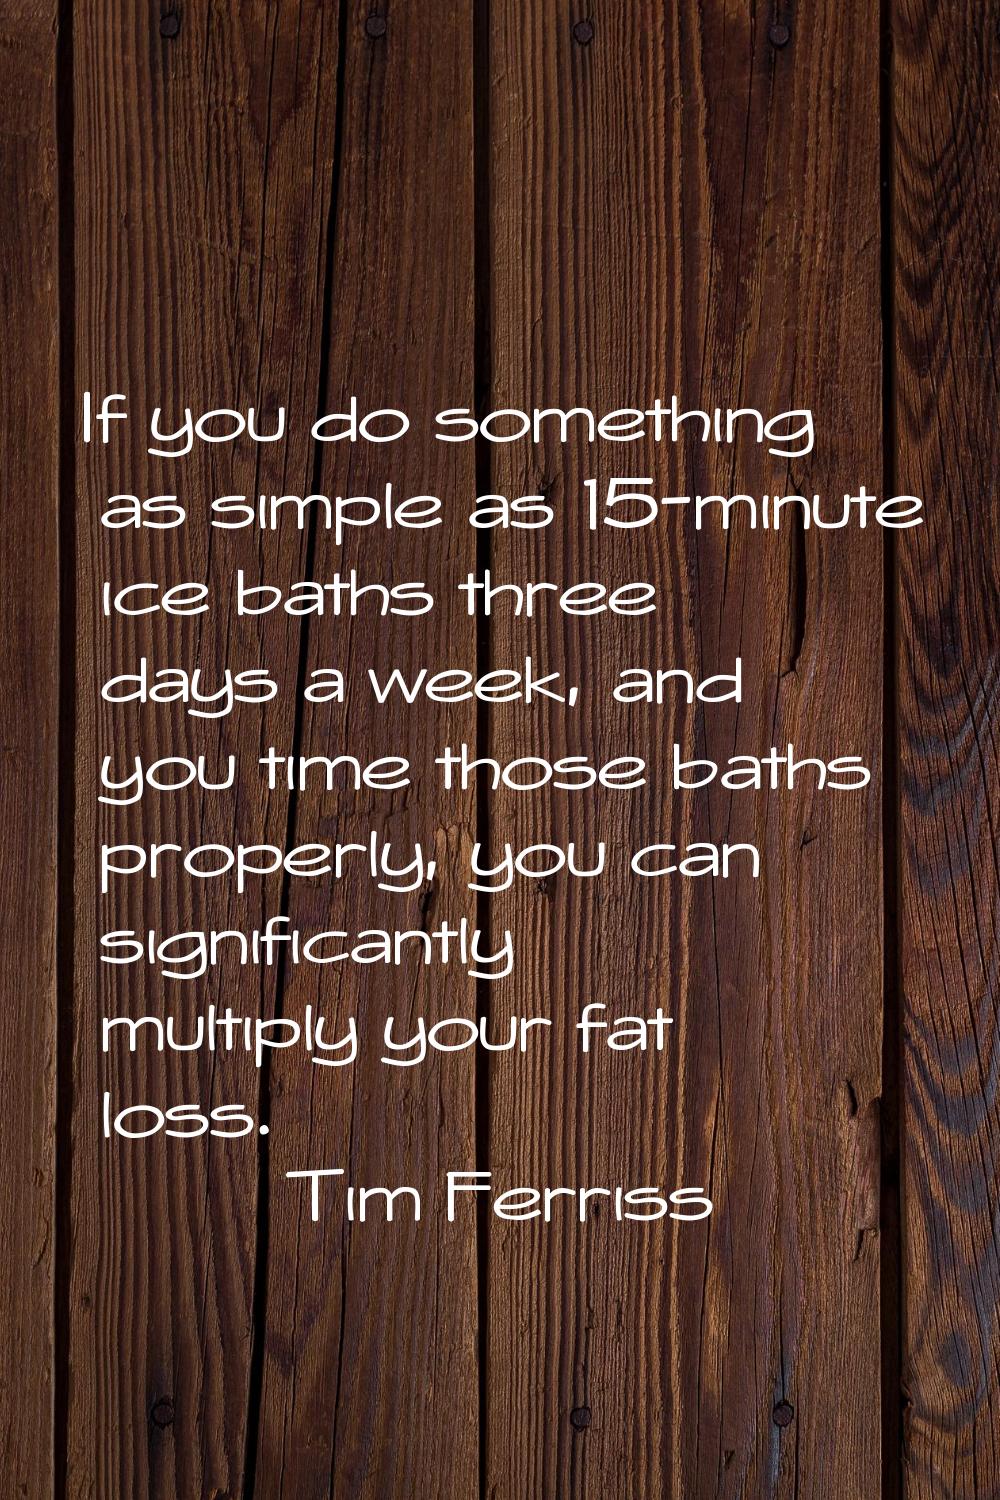 If you do something as simple as 15-minute ice baths three days a week, and you time those baths pr